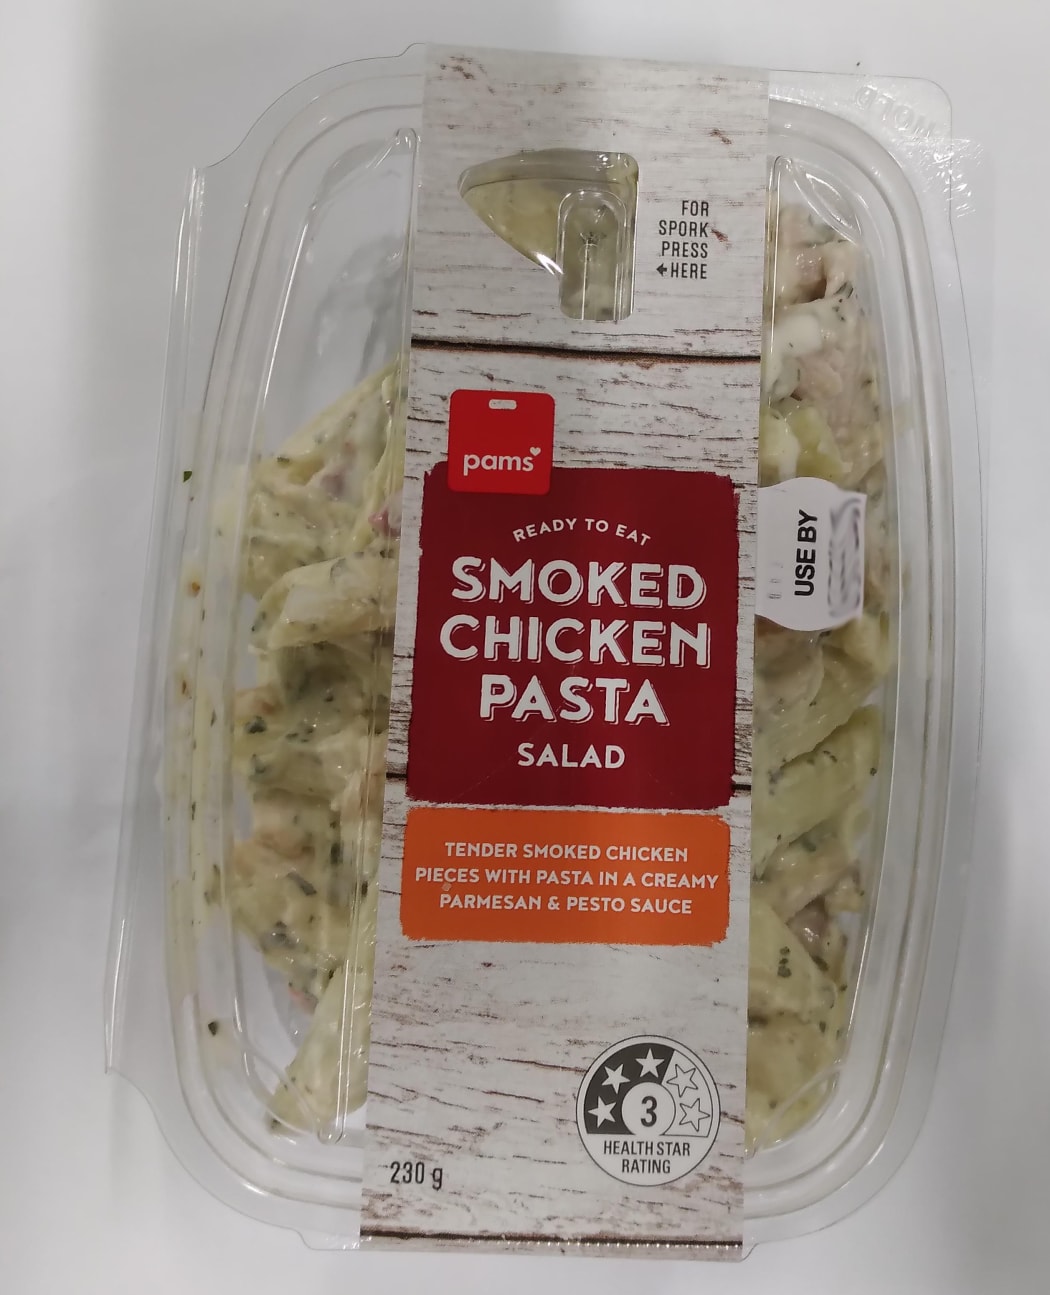 Pams Smoked Chicken Pasta, is among the foods recalled.